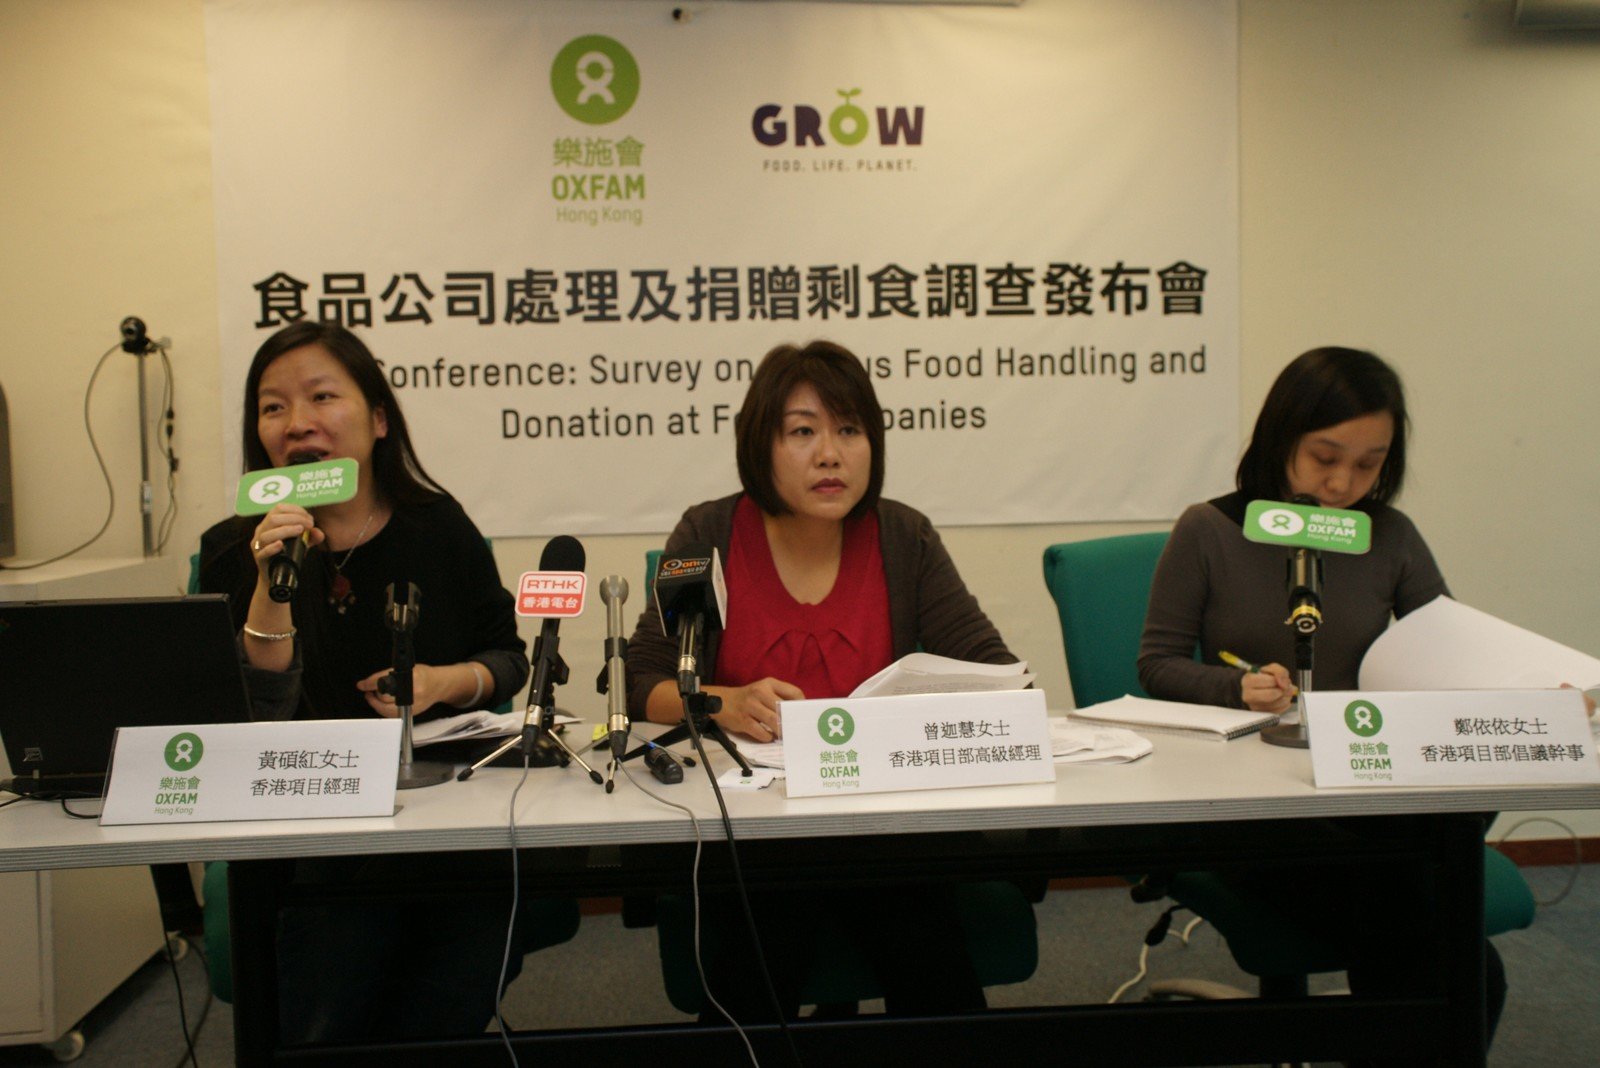 (From left) Oxfam Hong Kong Programme Manager Wong Shek-hung, Hong Kong Programme Unit Senior Manager Kalina Tsang and Hong Kong Programme Campaigns Officer Debby Cheng Yi-yi said 90.4 per cent of the food companies that responded to the survey did not donate their surplus food to food banks or charities. Of these, 67 per cent said the reason was because they were worried about product liability issues.